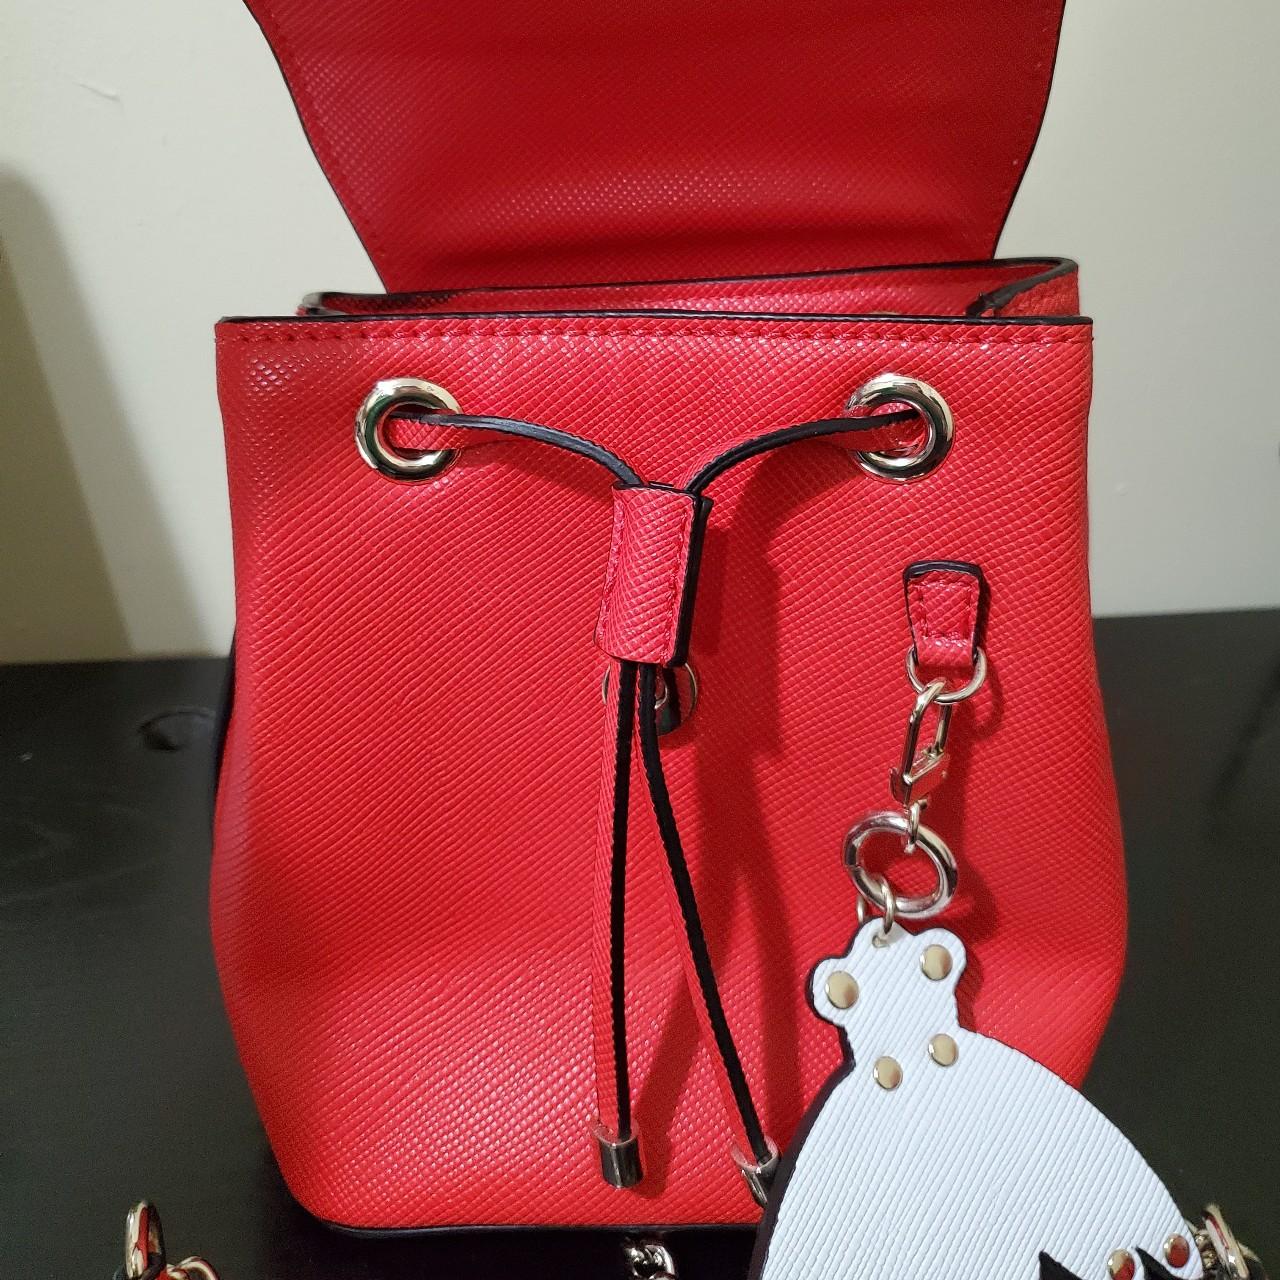 Guess, Bags, Small Guess Red Crossbody Purse